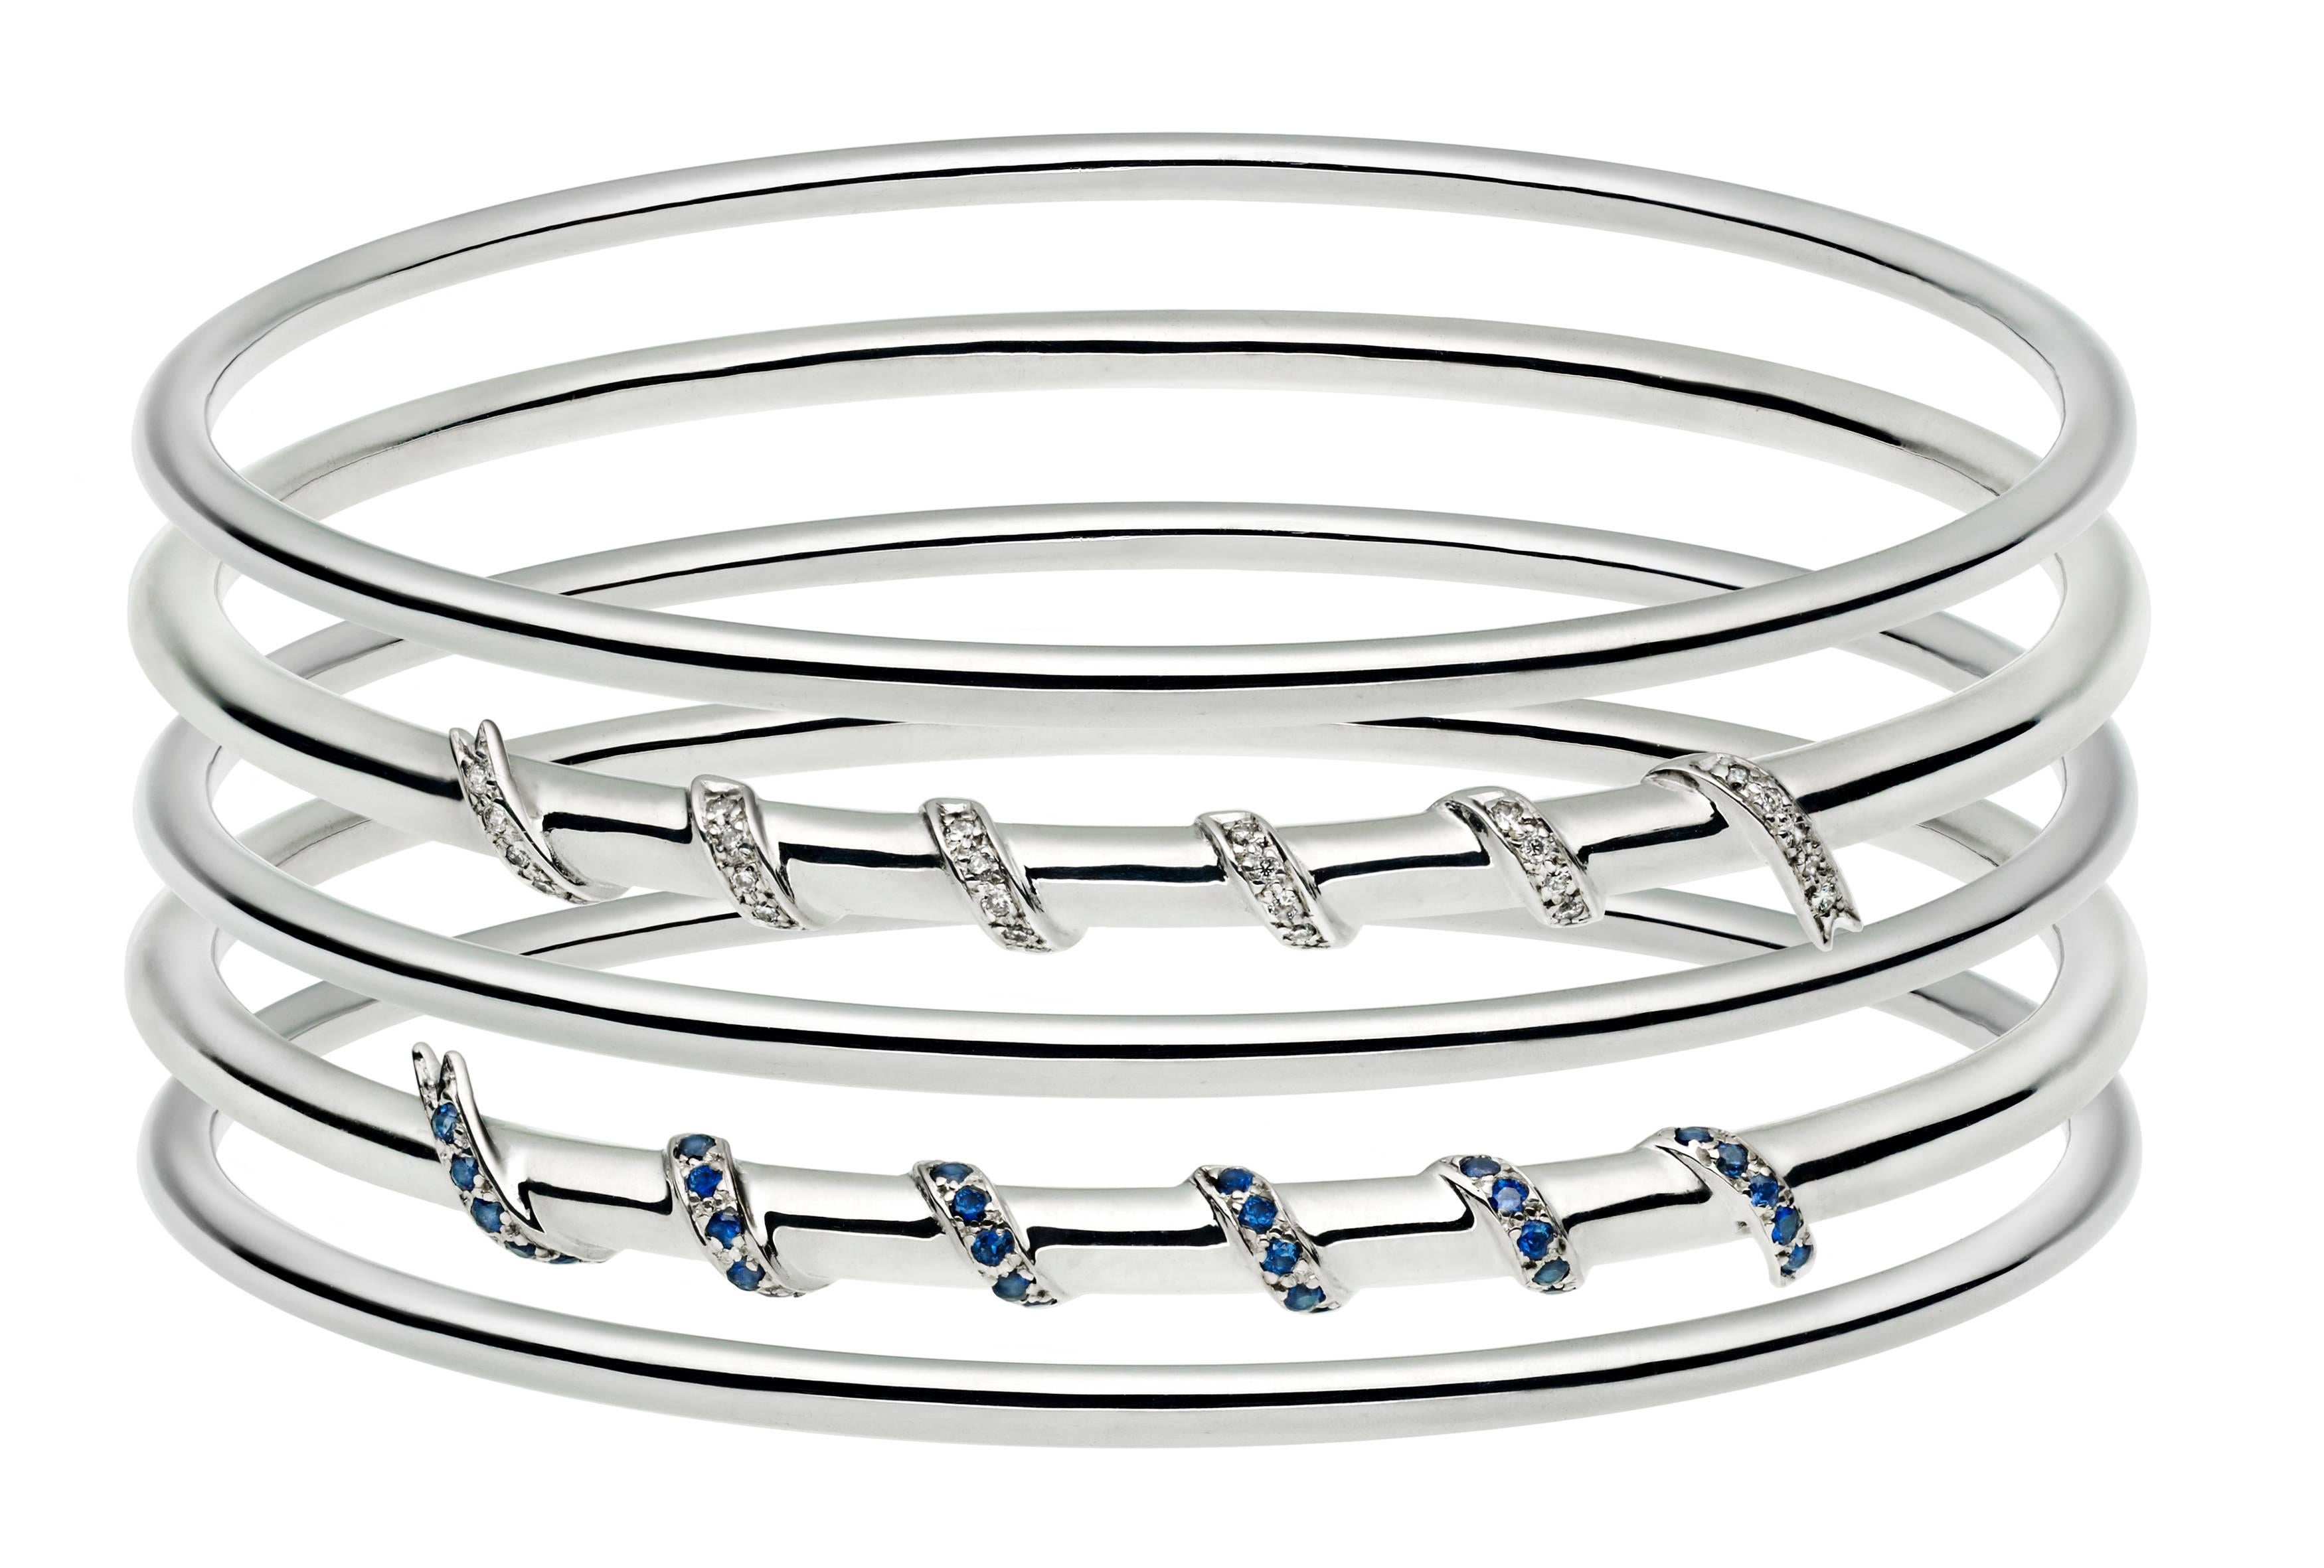 The bangle is crafted from solid 18ct white gold and pave set with 0.35ct F vs colour white diamonds which are set into the elegant ribbon which wraps around the top section. A range of colour ways of golds and gemstones can be ordered. 

The